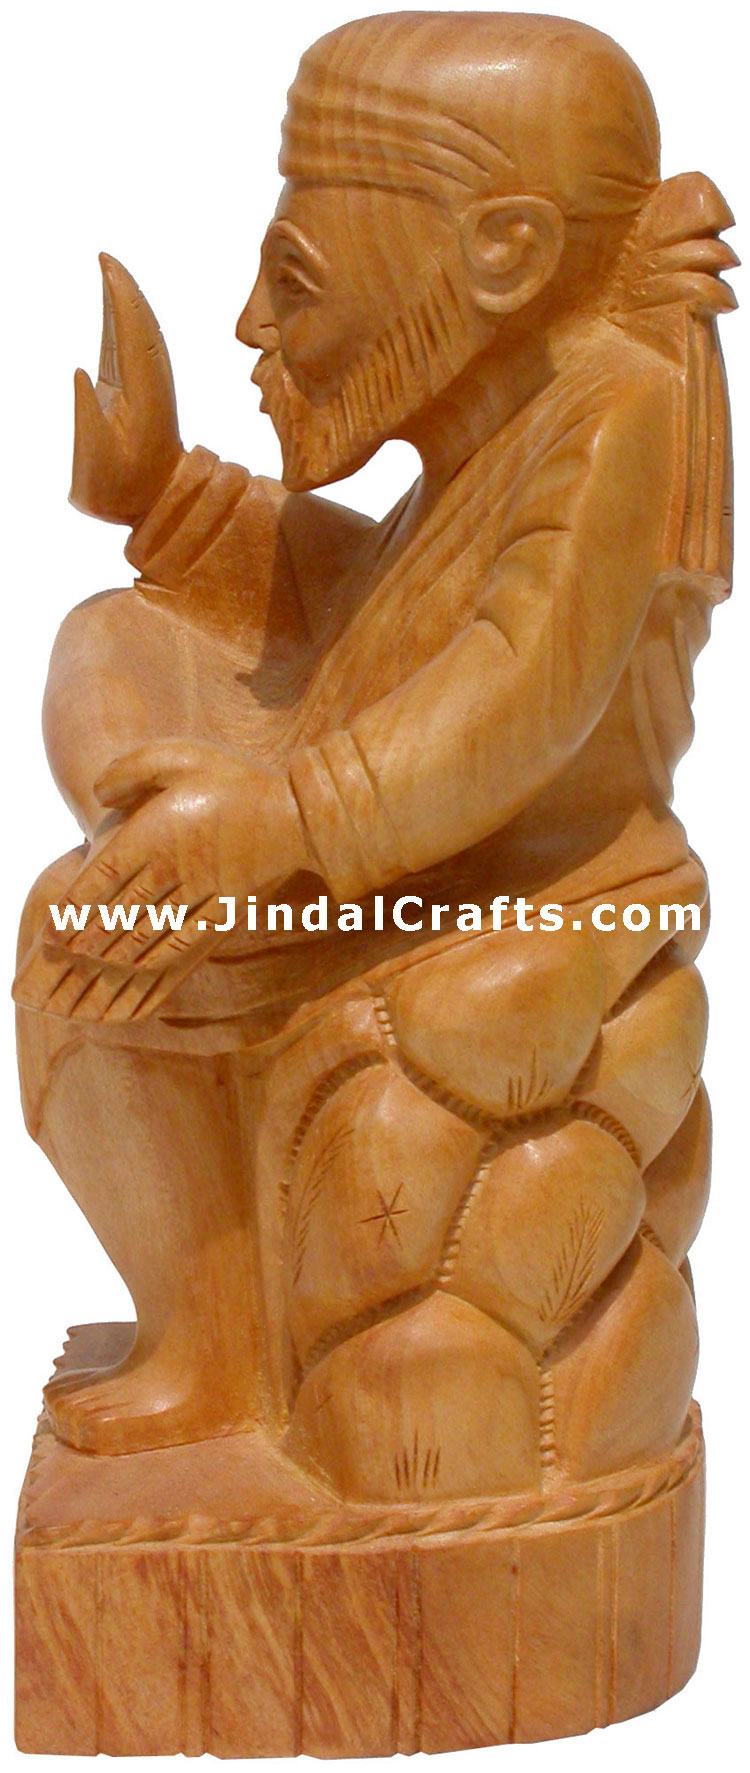 Sant Sai Baba - Hand Carved Wooden Staute Indian Crafts